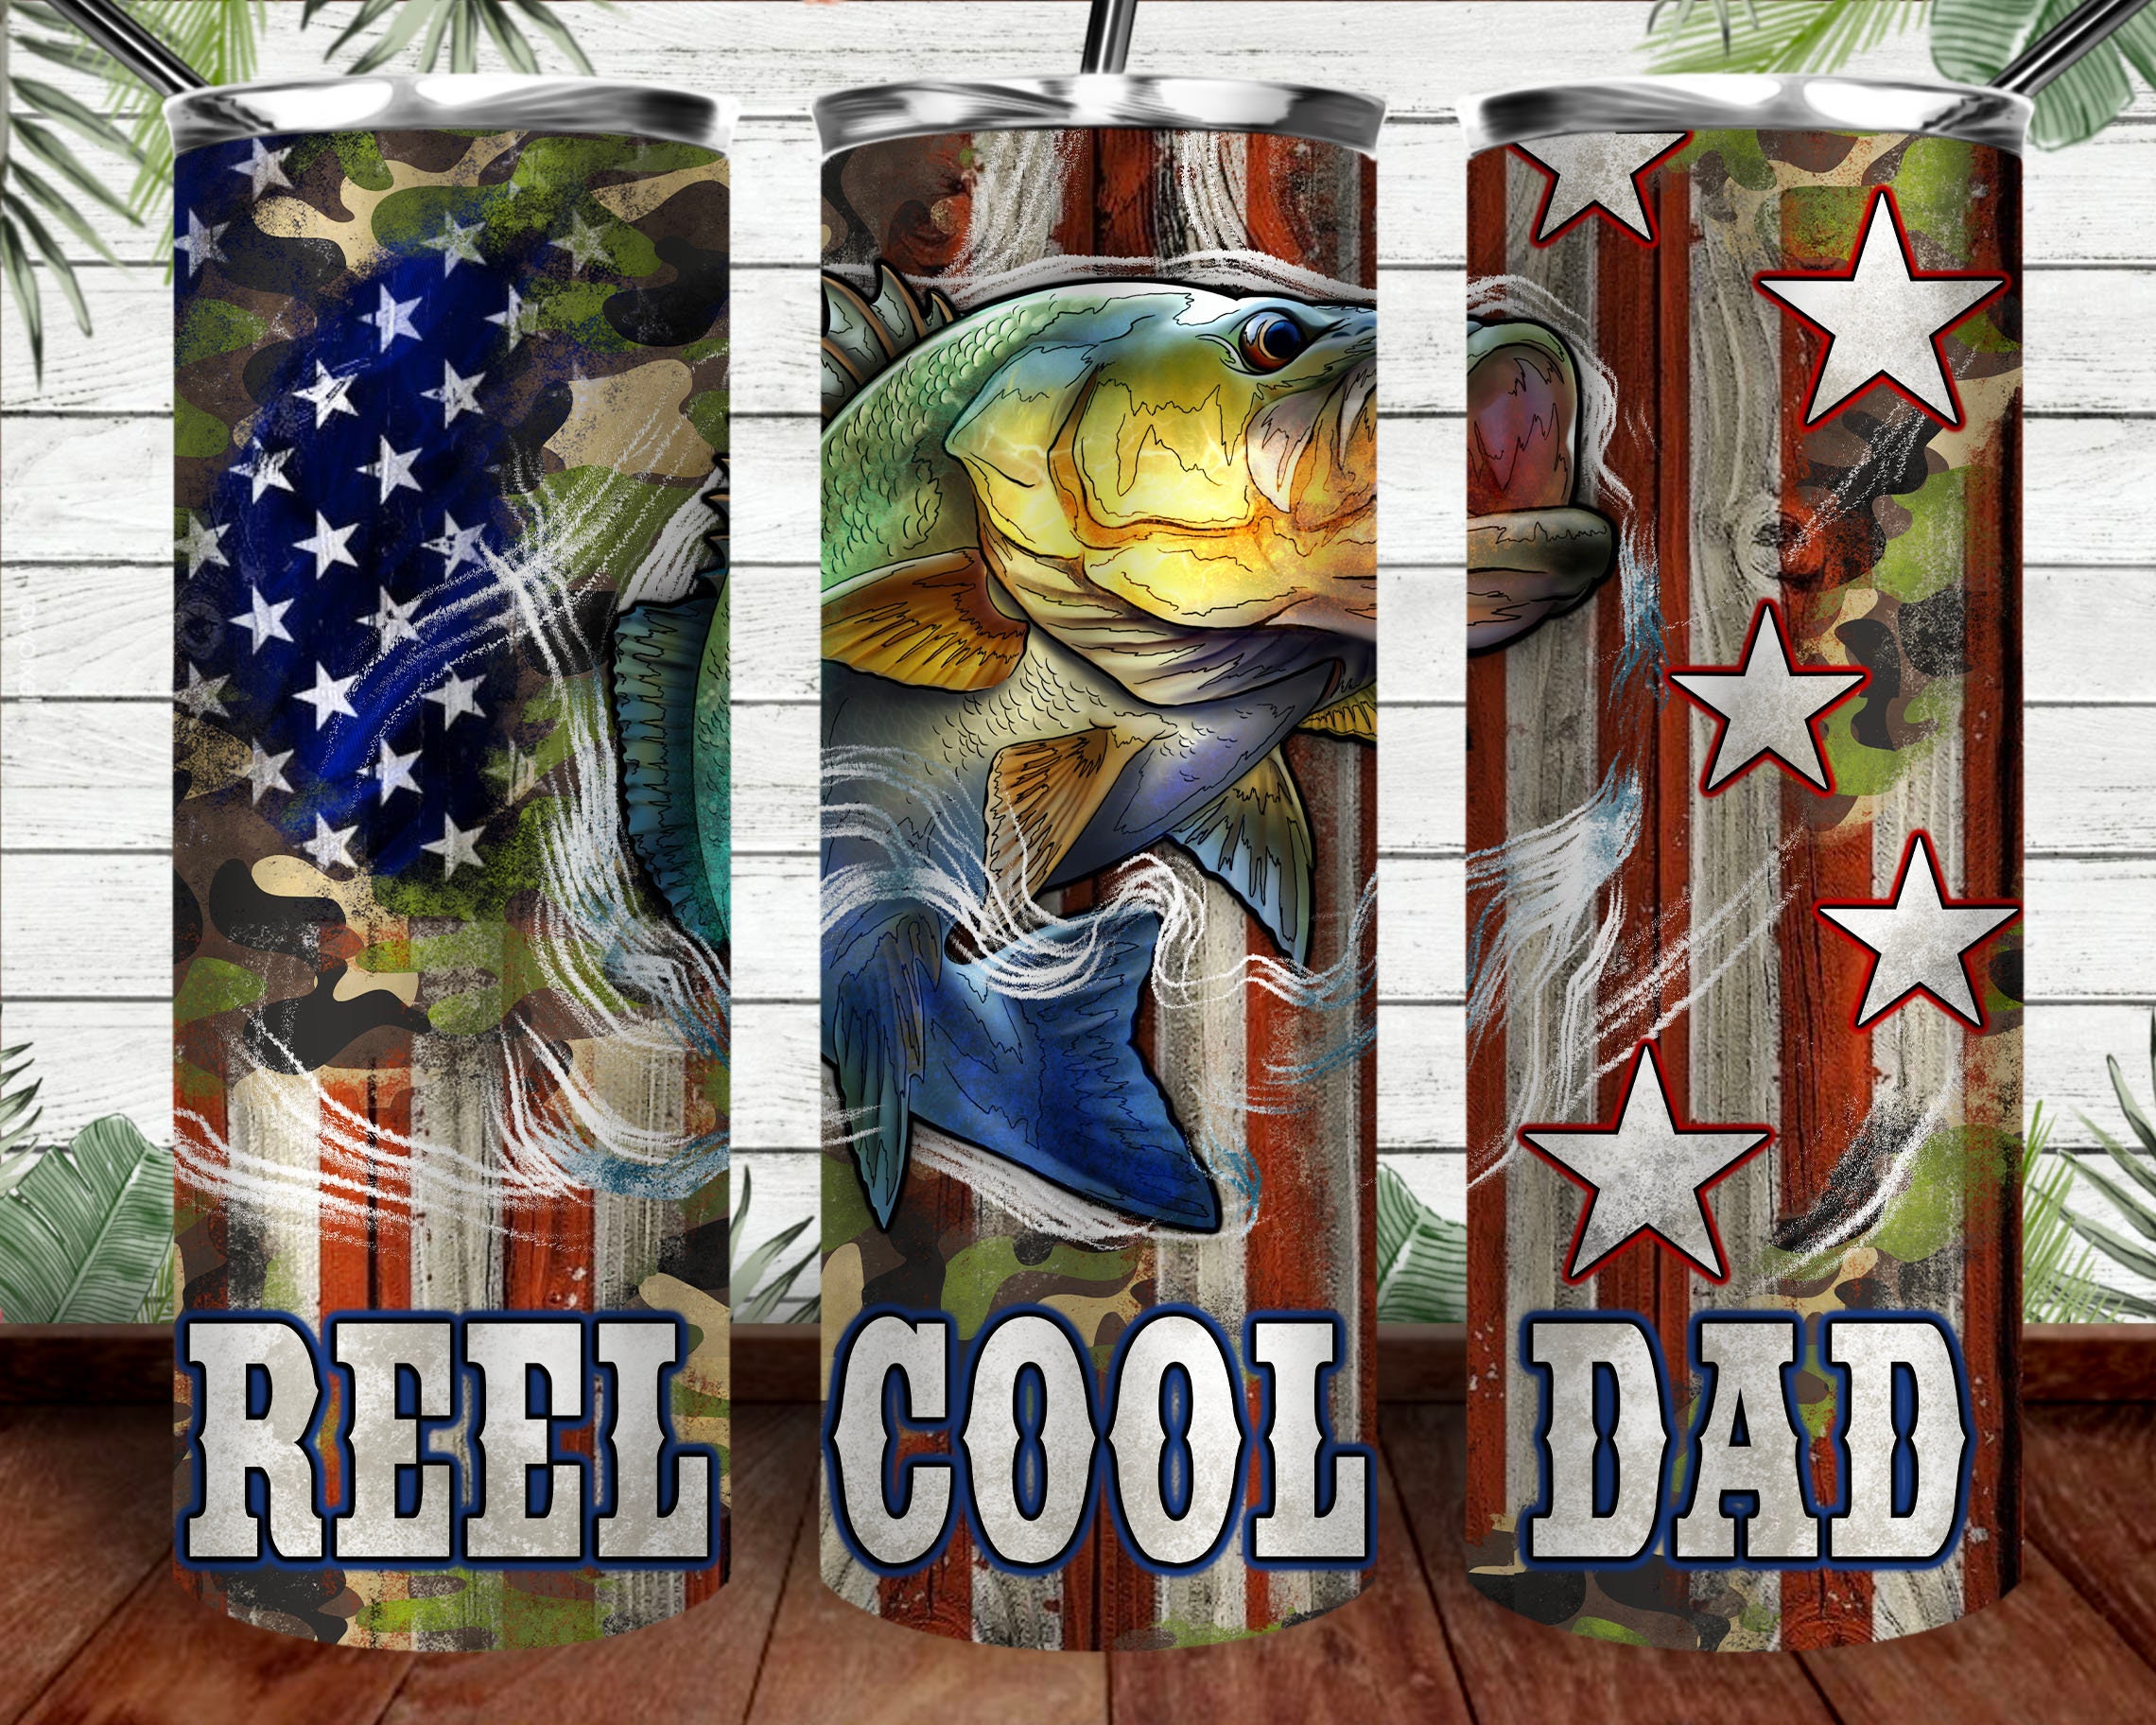 Reel Cool Dad Vintage Fisherman Papa Father's Day Gift Unisex Hooded S –  UltimateShirtsStore